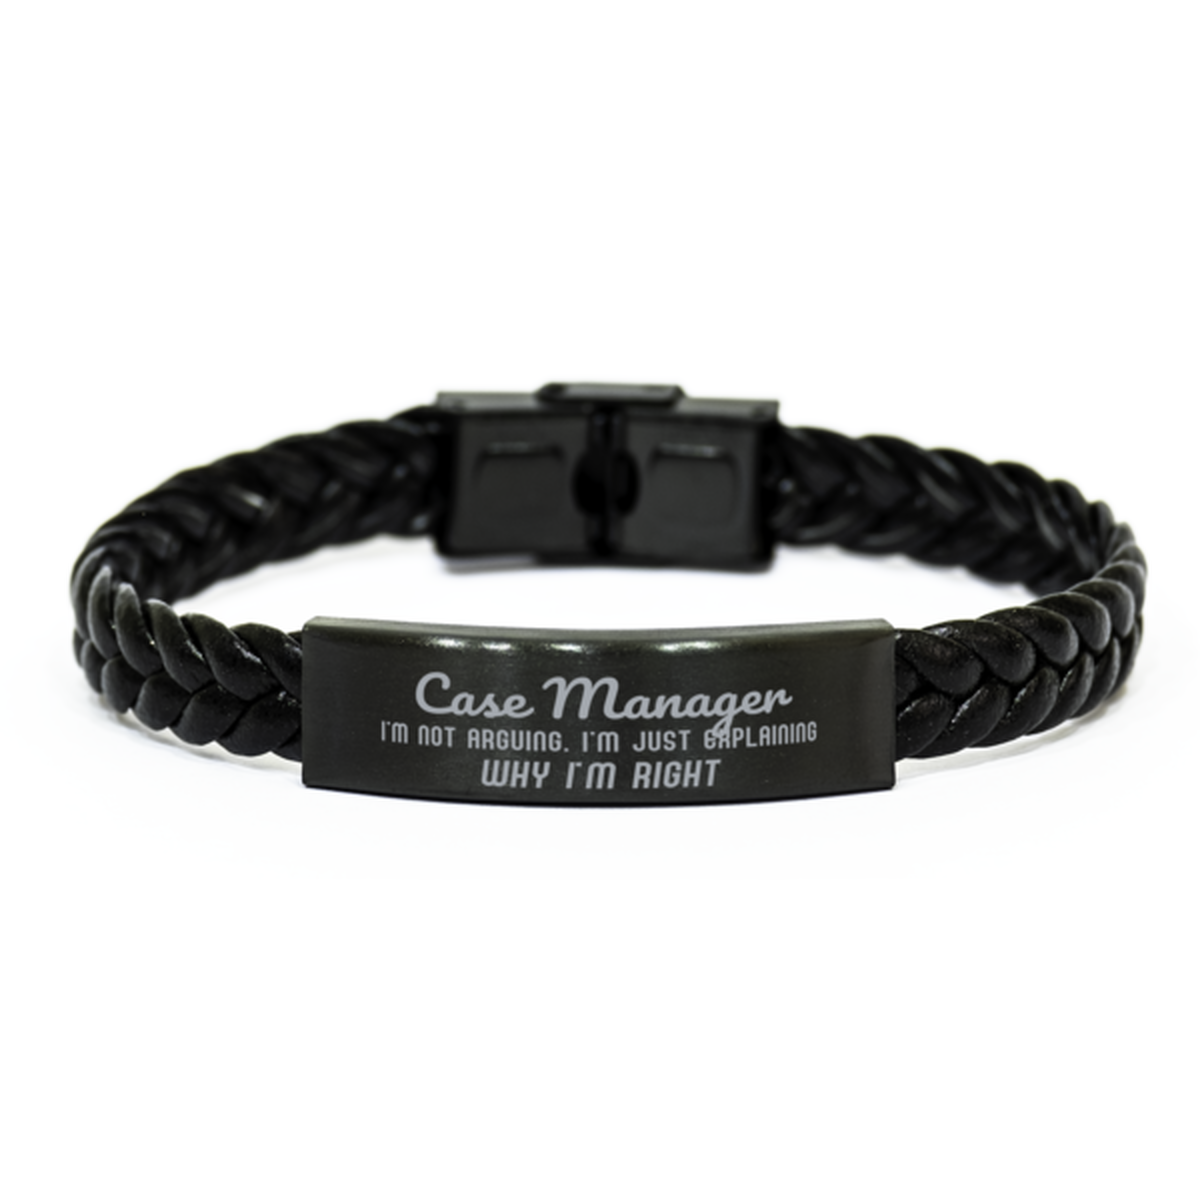 Case Manager I'm not Arguing. I'm Just Explaining Why I'm RIGHT Braided Leather Bracelet, Graduation Birthday Christmas Case Manager Gifts For Case Manager Funny Saying Quote Present for Men Women Coworker